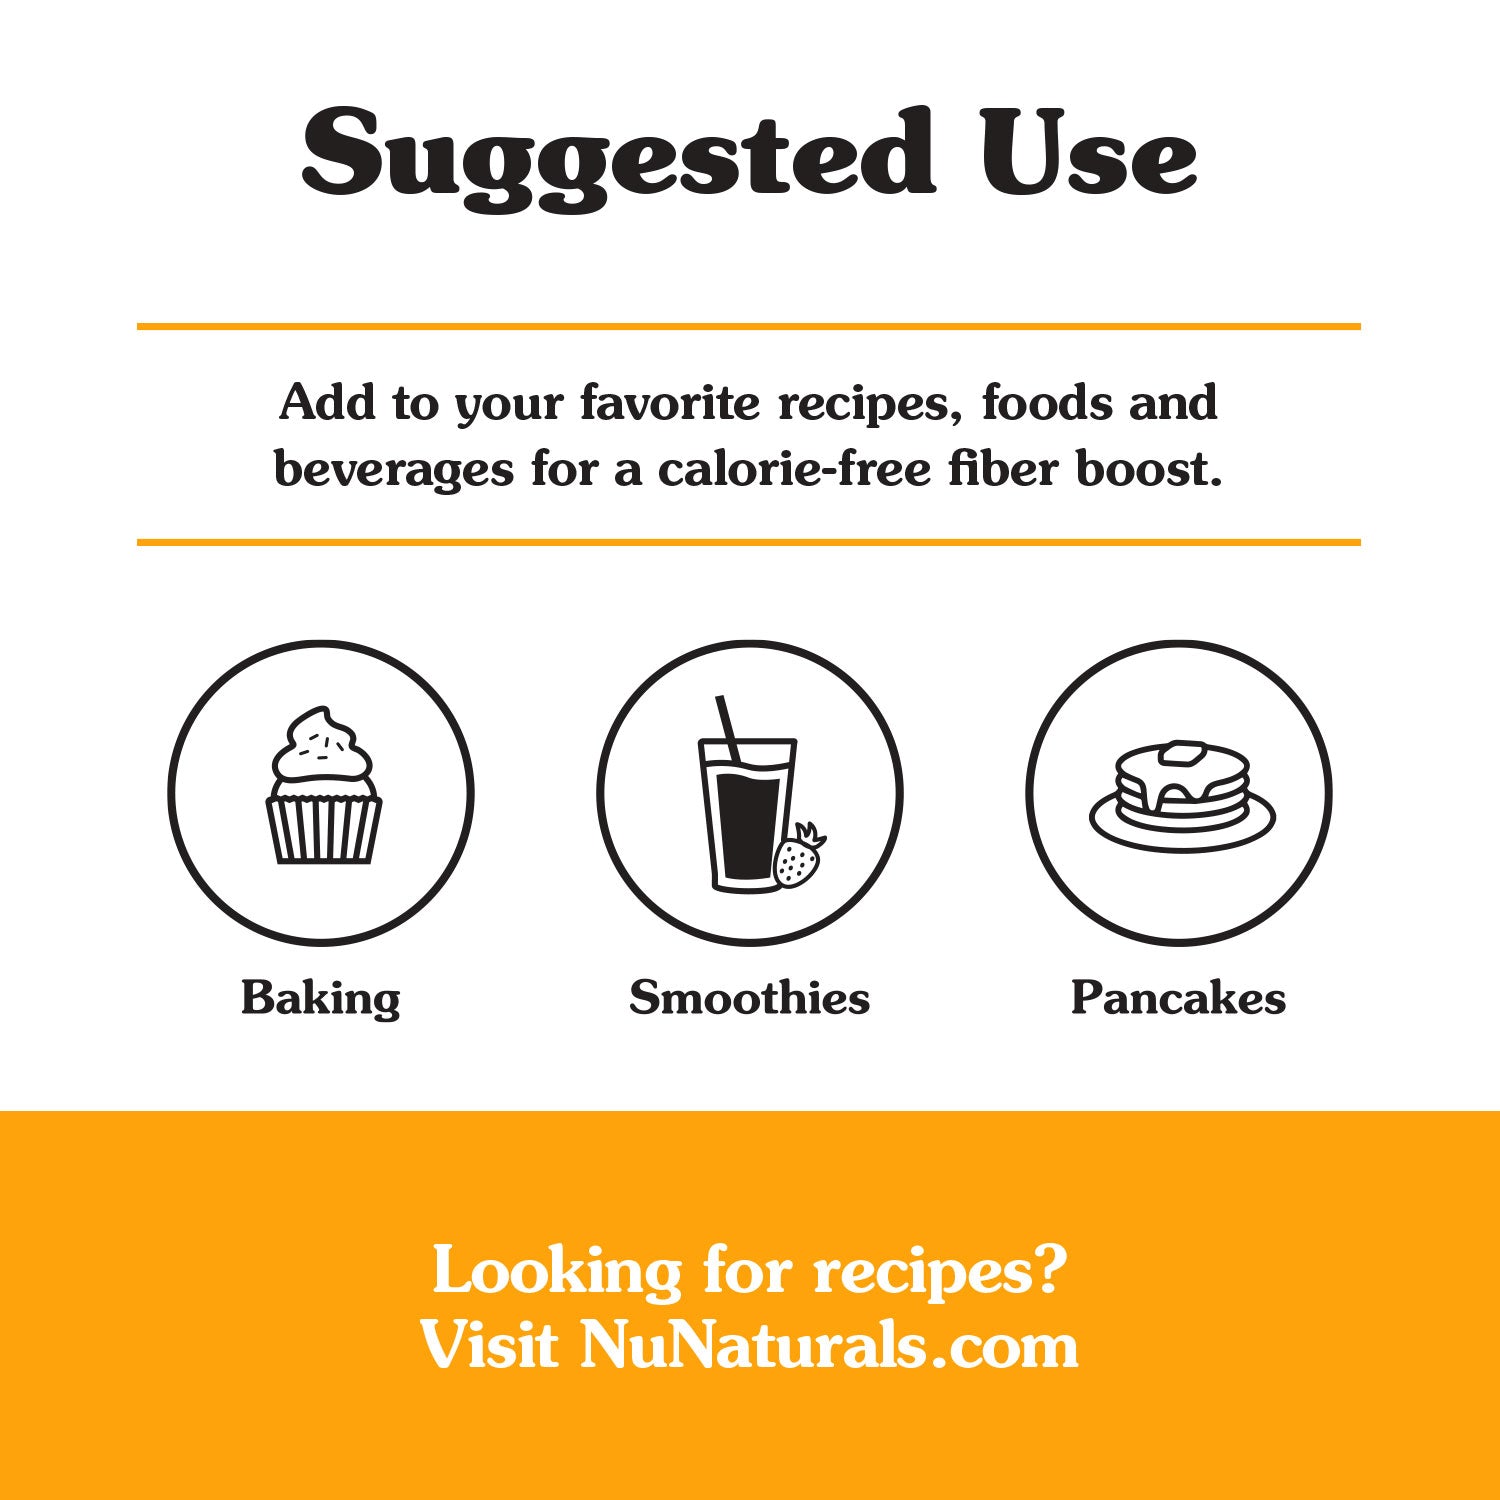 Suggested Uses for NuNaturals Oat Fiber